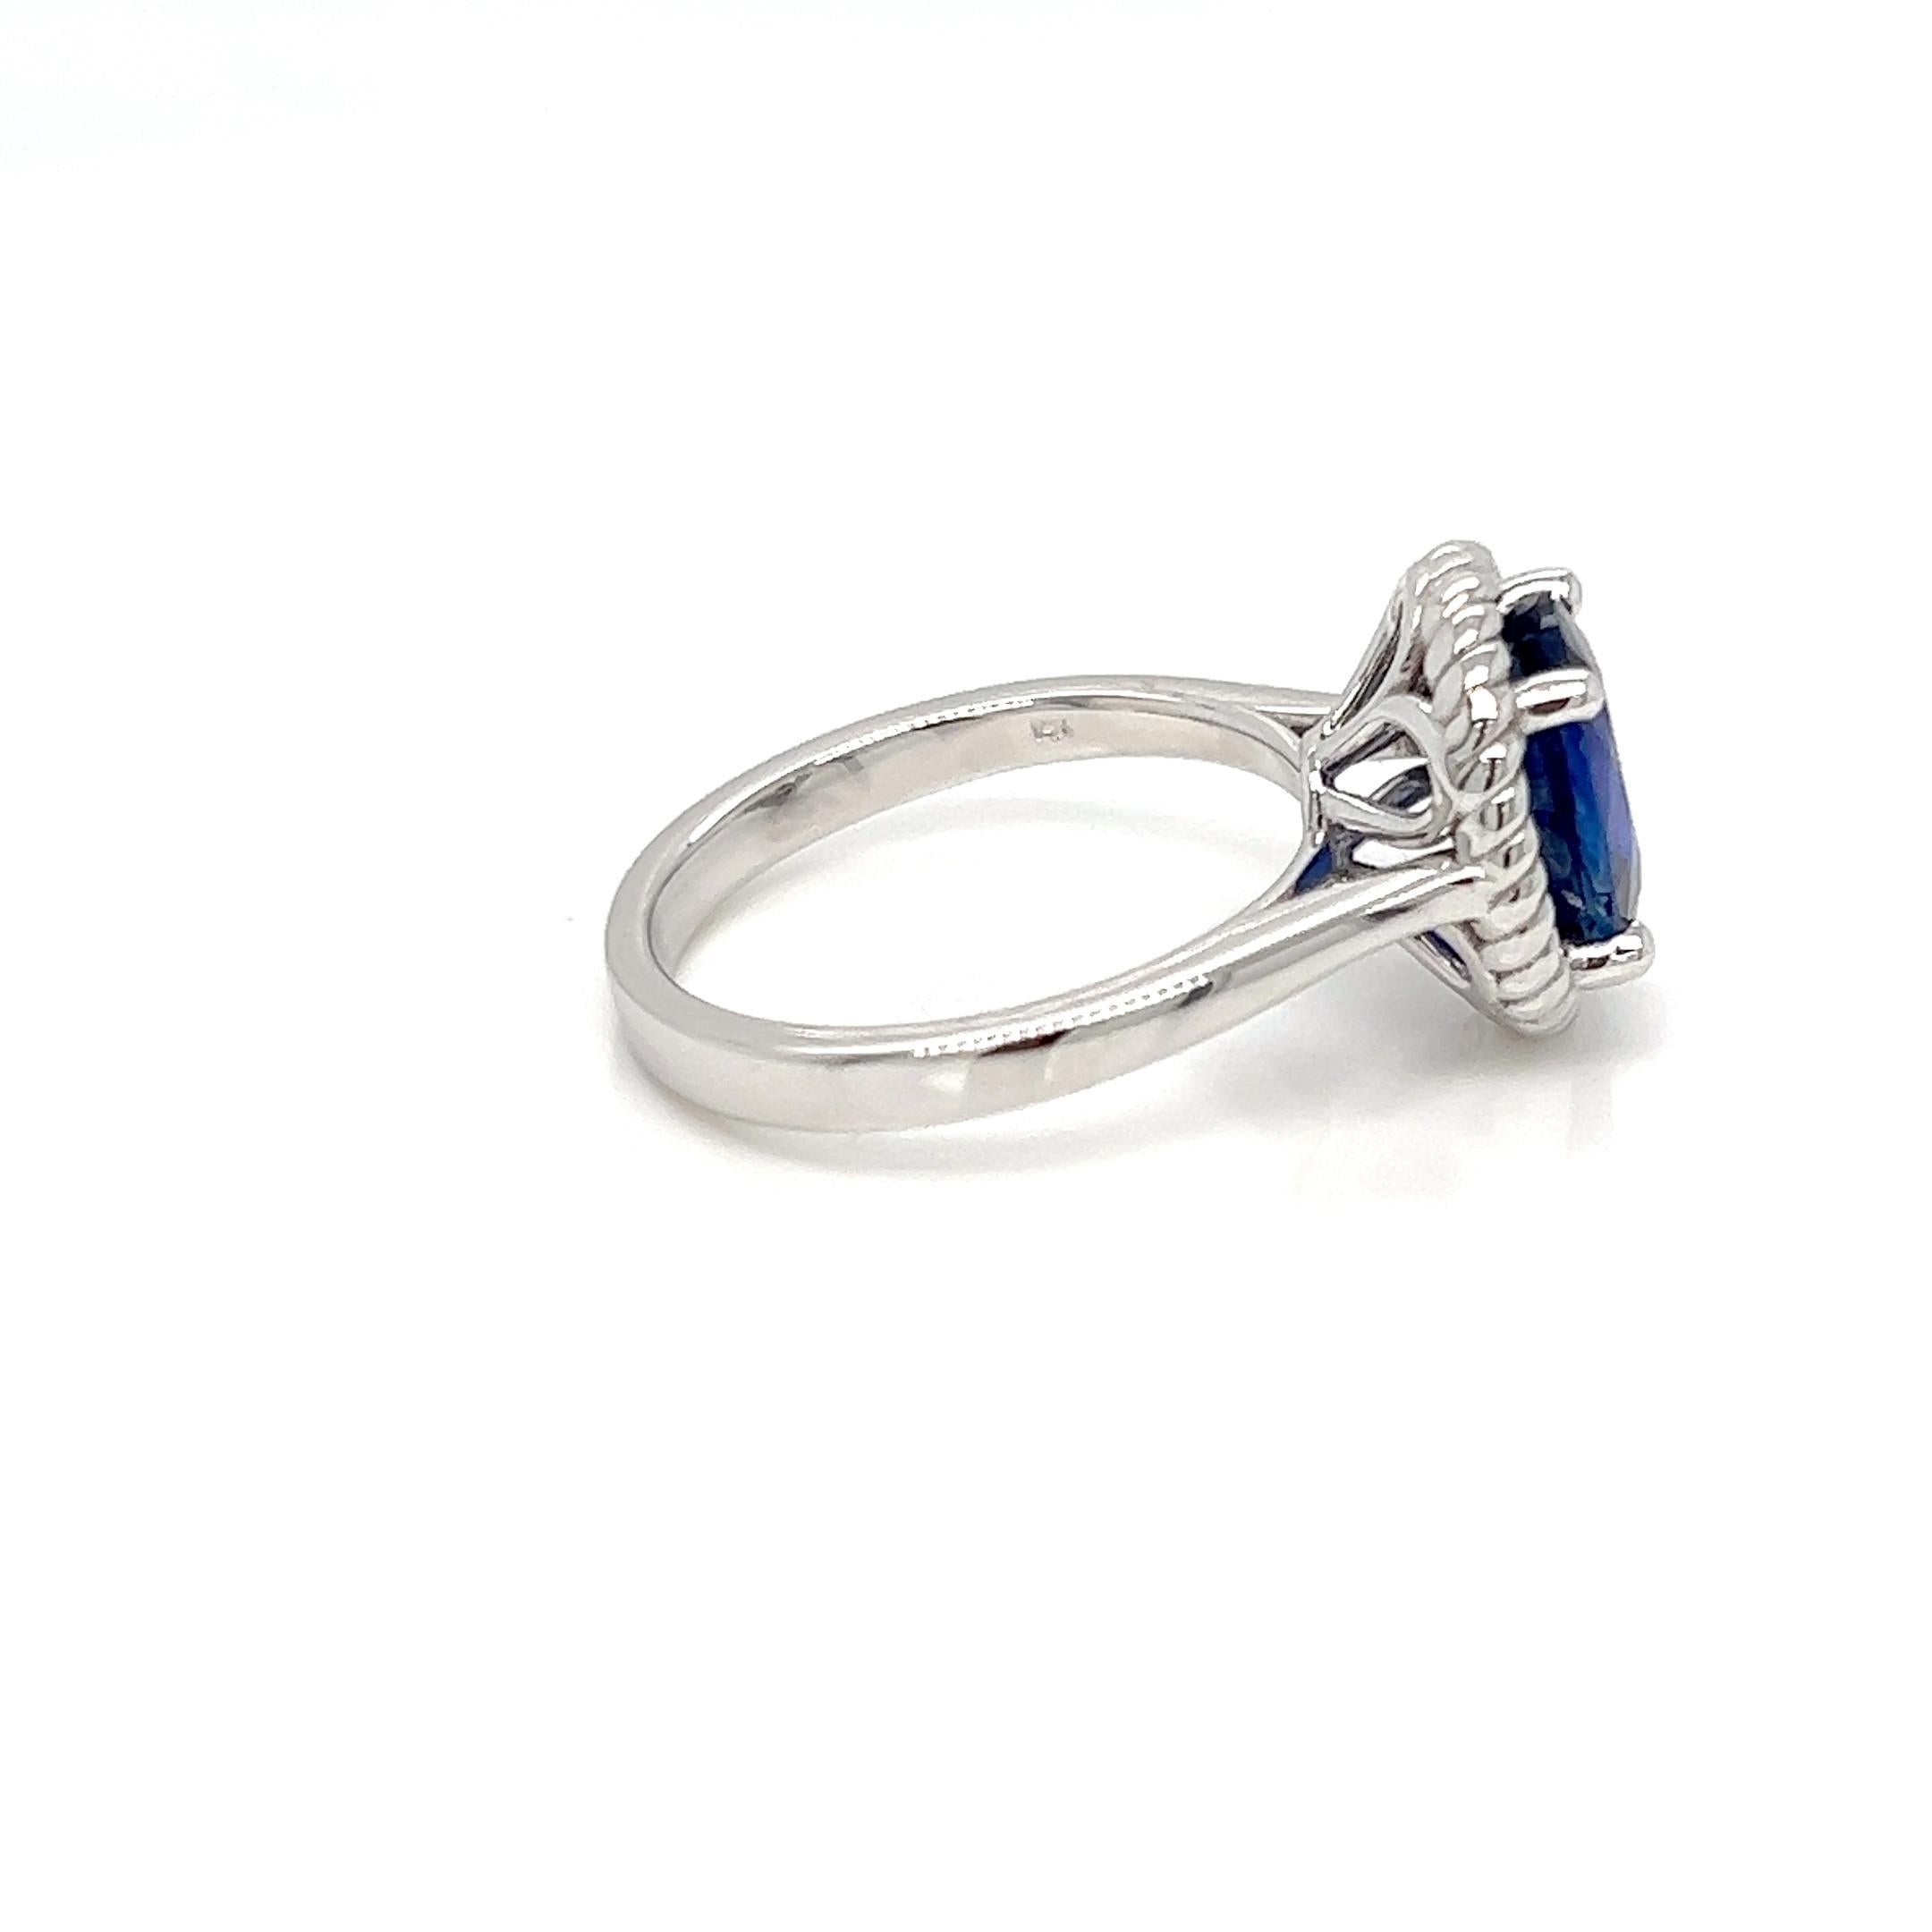 3.00 Carats Oval Cut Sapphire Solitaire Ring in 14K White Gold In New Condition For Sale In New York, NY